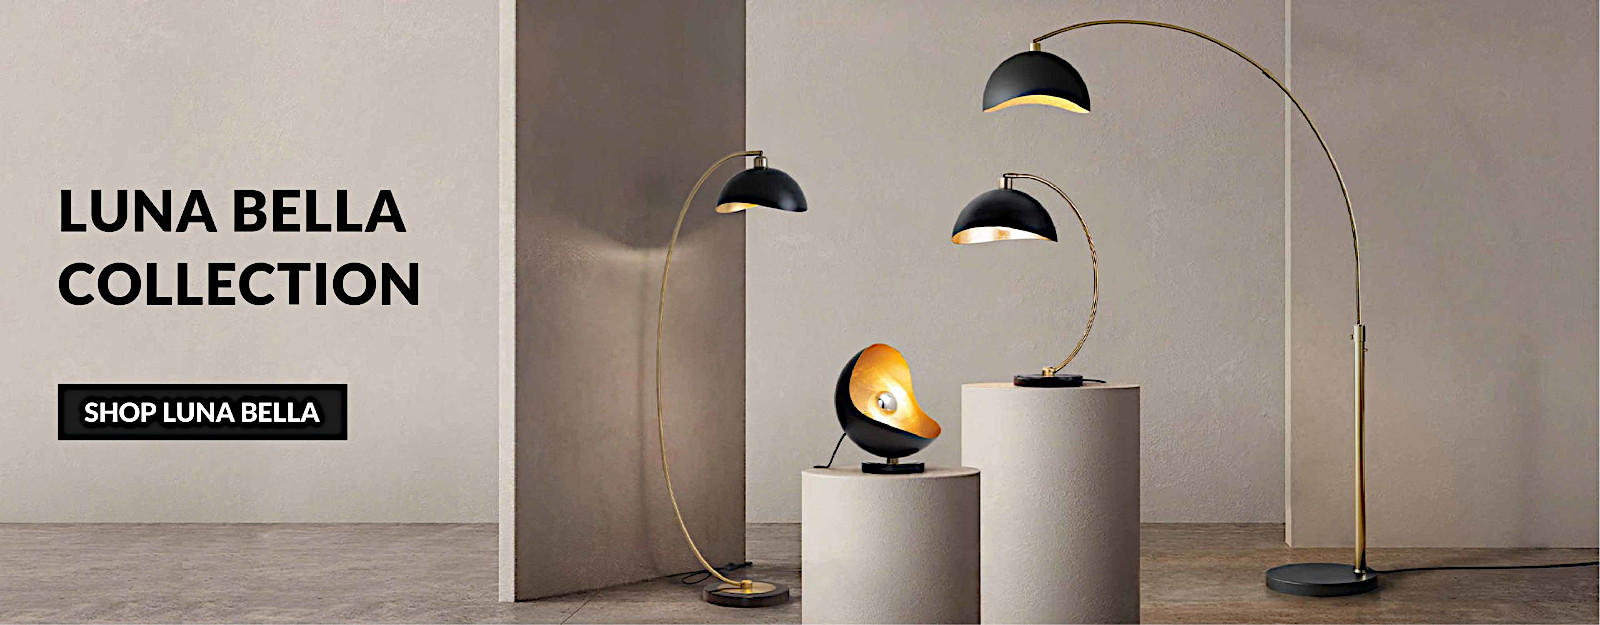 Luna Bella lighting collection competitive price